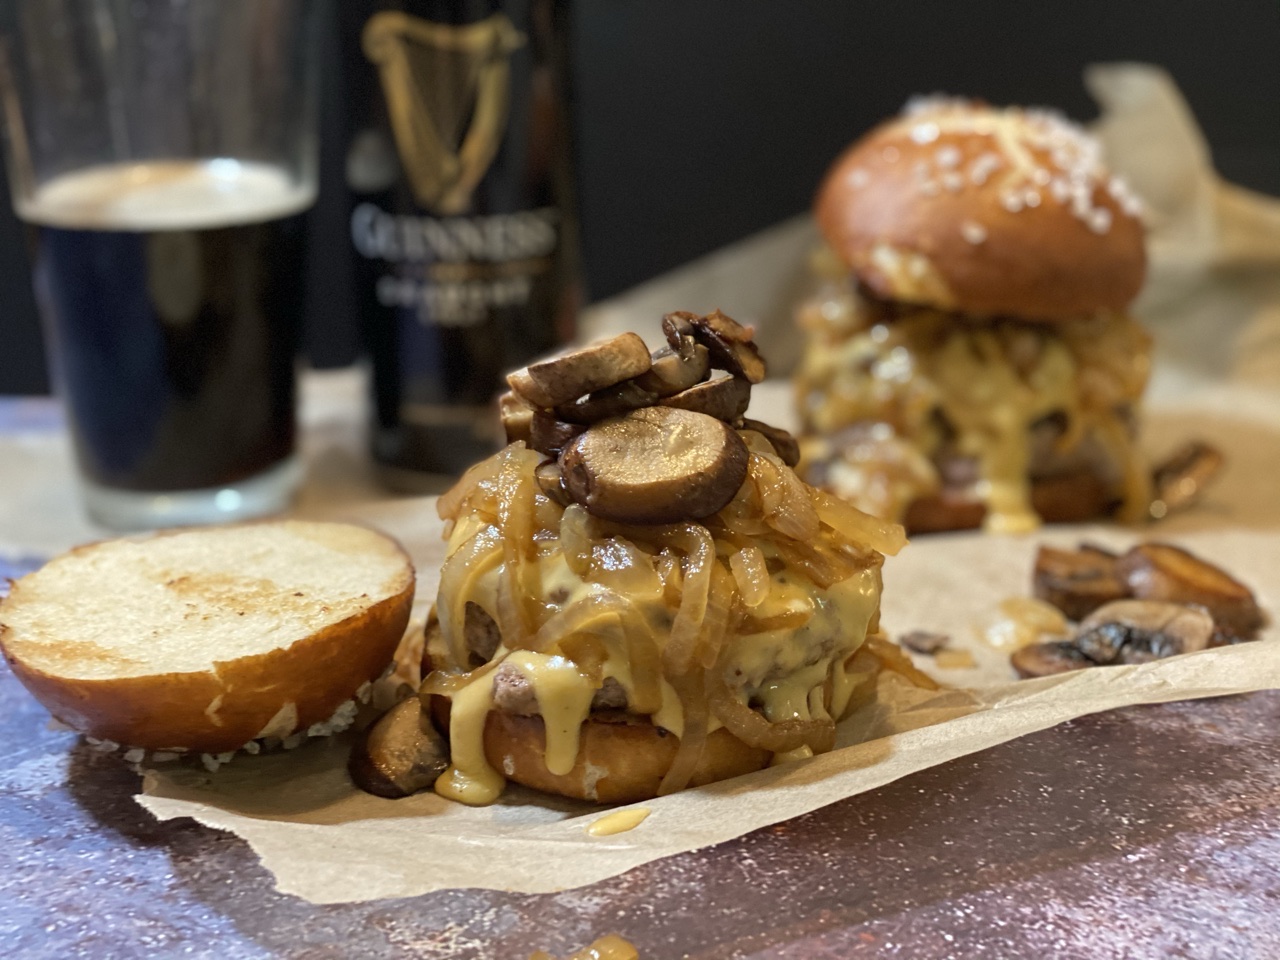 CA154CB9 FFF7 4EF8 BDBC 7D68B7B6EE49 - Guinness Blue Cheese Burgers with Guinness Cheddar & Caramelized Onions & Mushrooms